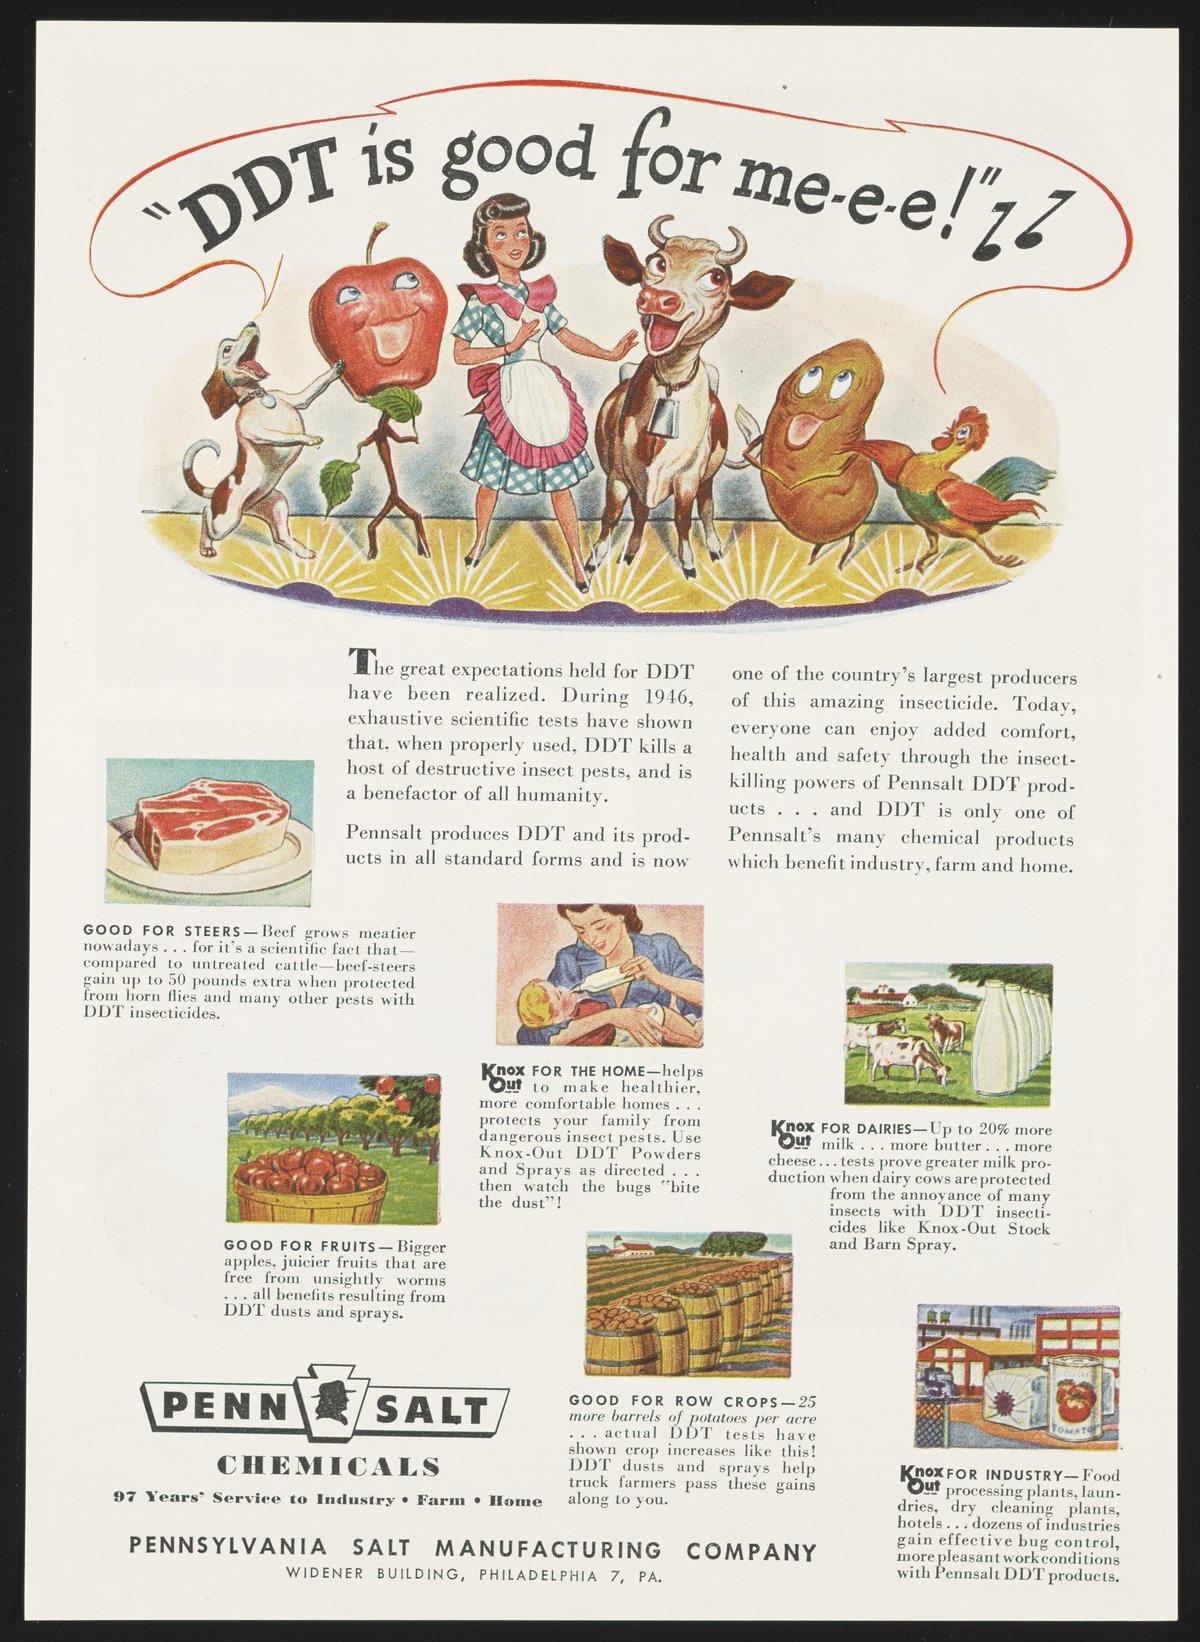 Advertisement for DDT featured in Time Magazine, June 30, 1947. This image illustrates the rosy reputation that pesticides enjoyed before the publication of Silent Spring.